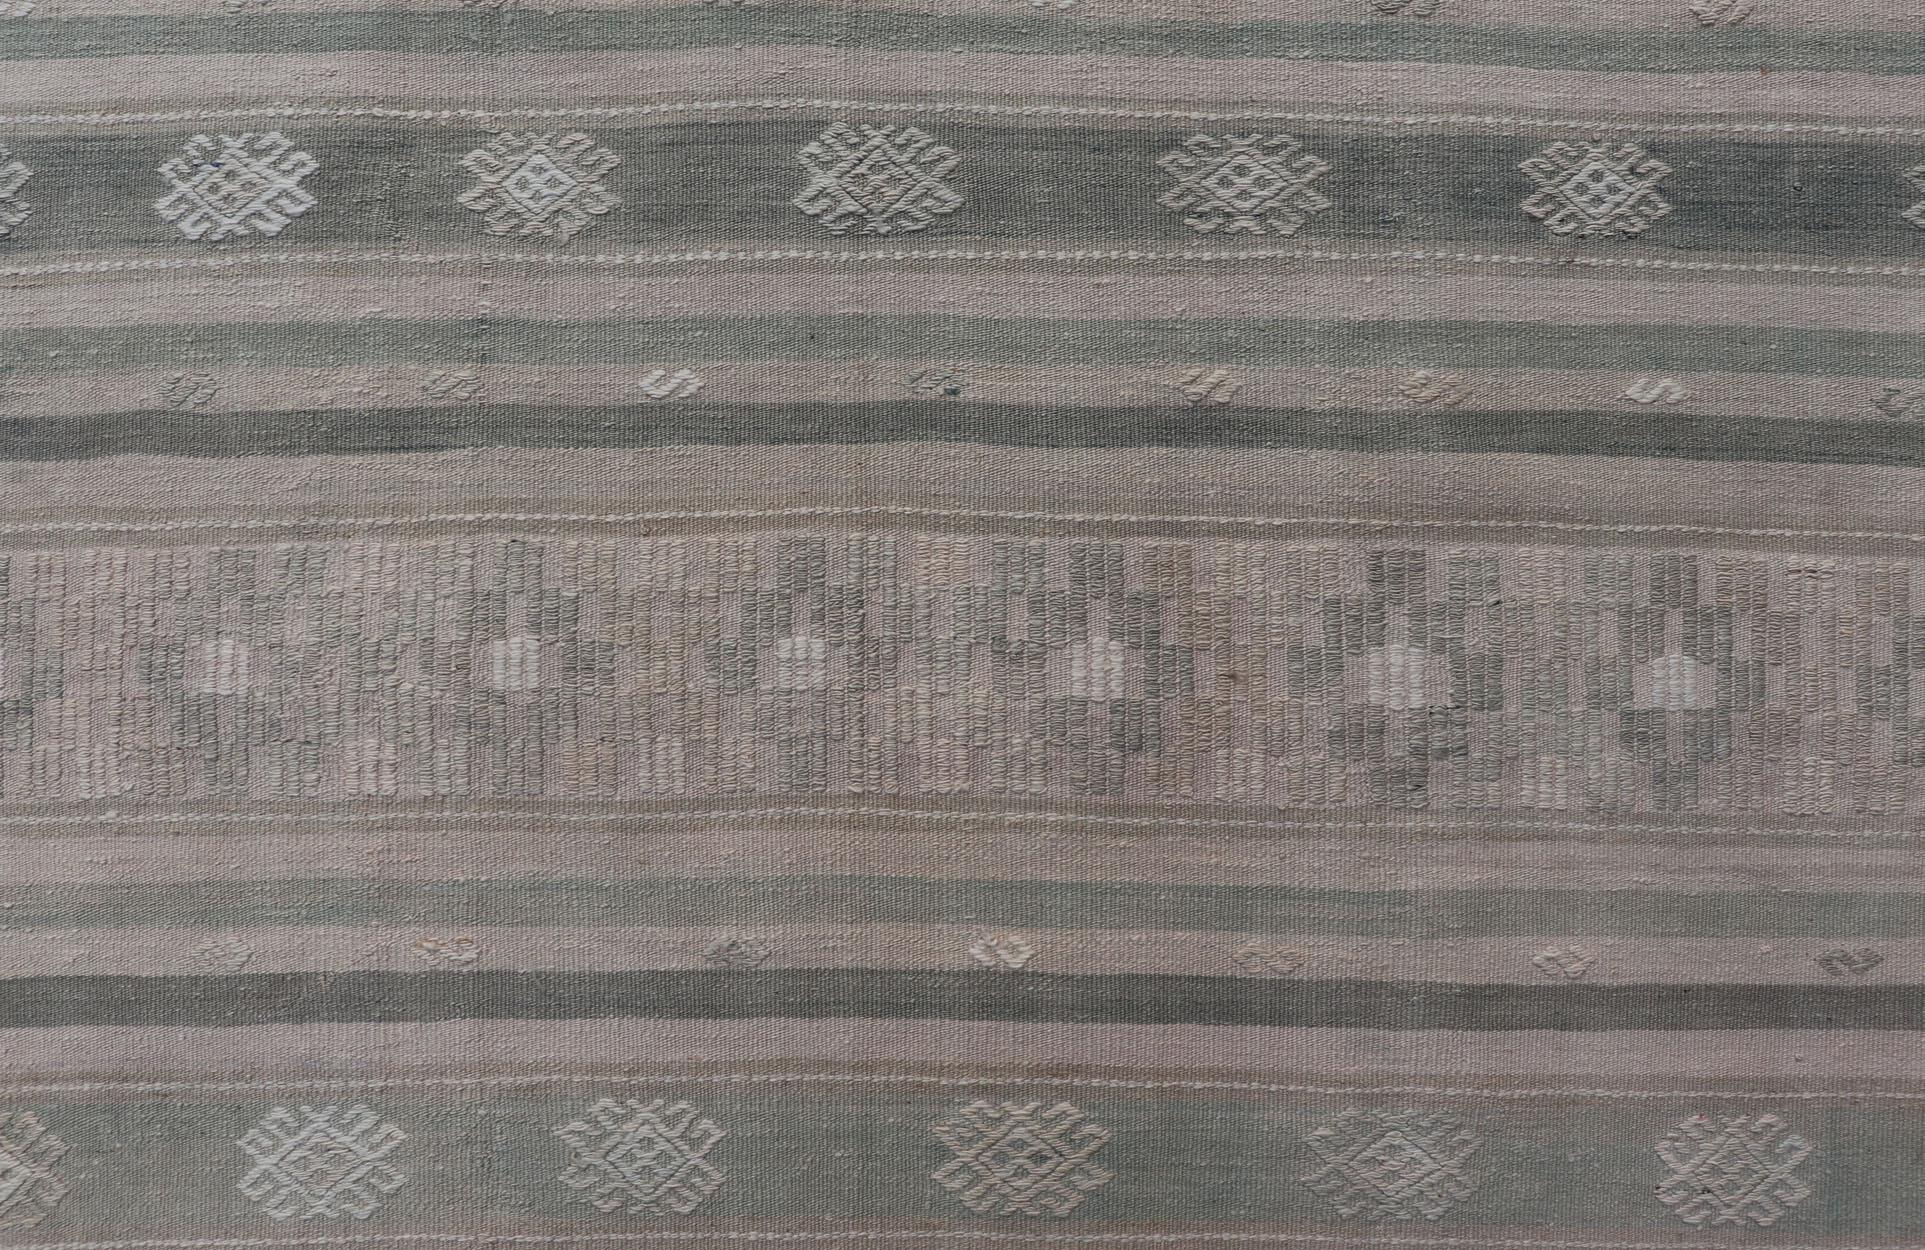 Turkish Flat-Weave Hand Woven Kilim with Embroideries in Taupe, Tan, Blue and Gray For Sale